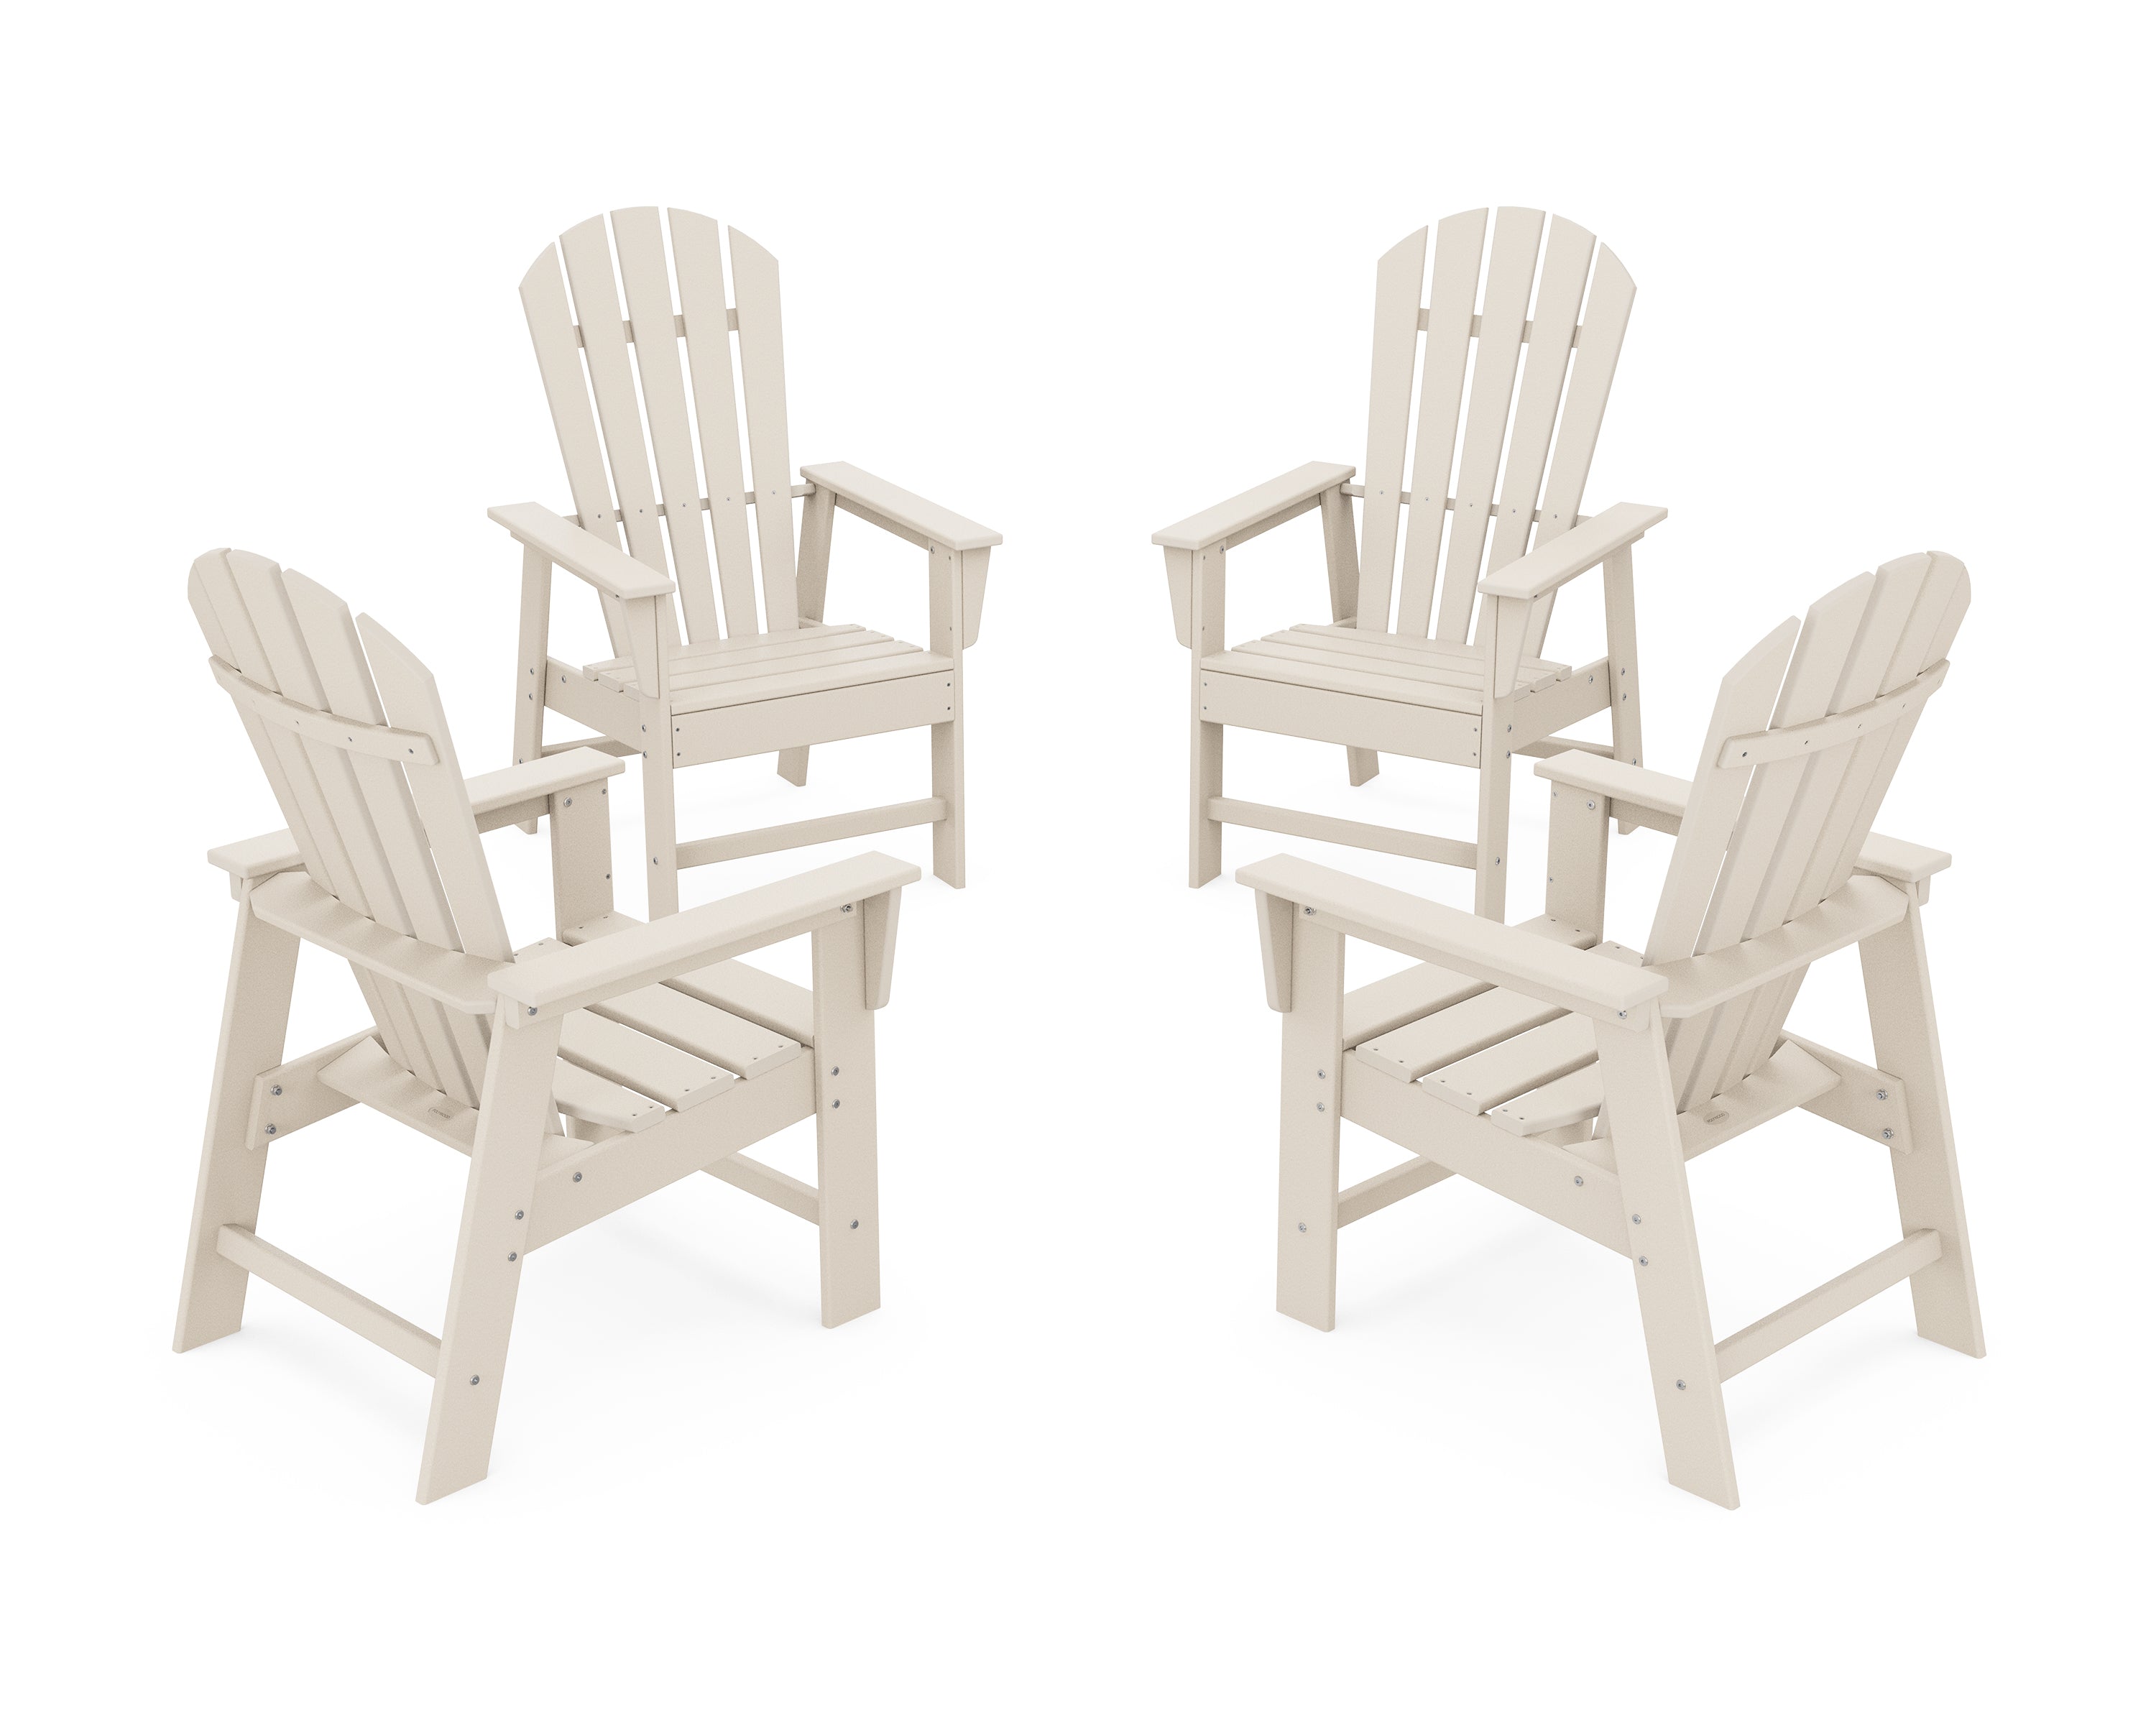 POLYWOOD® 4-Piece South Beach Casual Chair Conversation Set in Sand